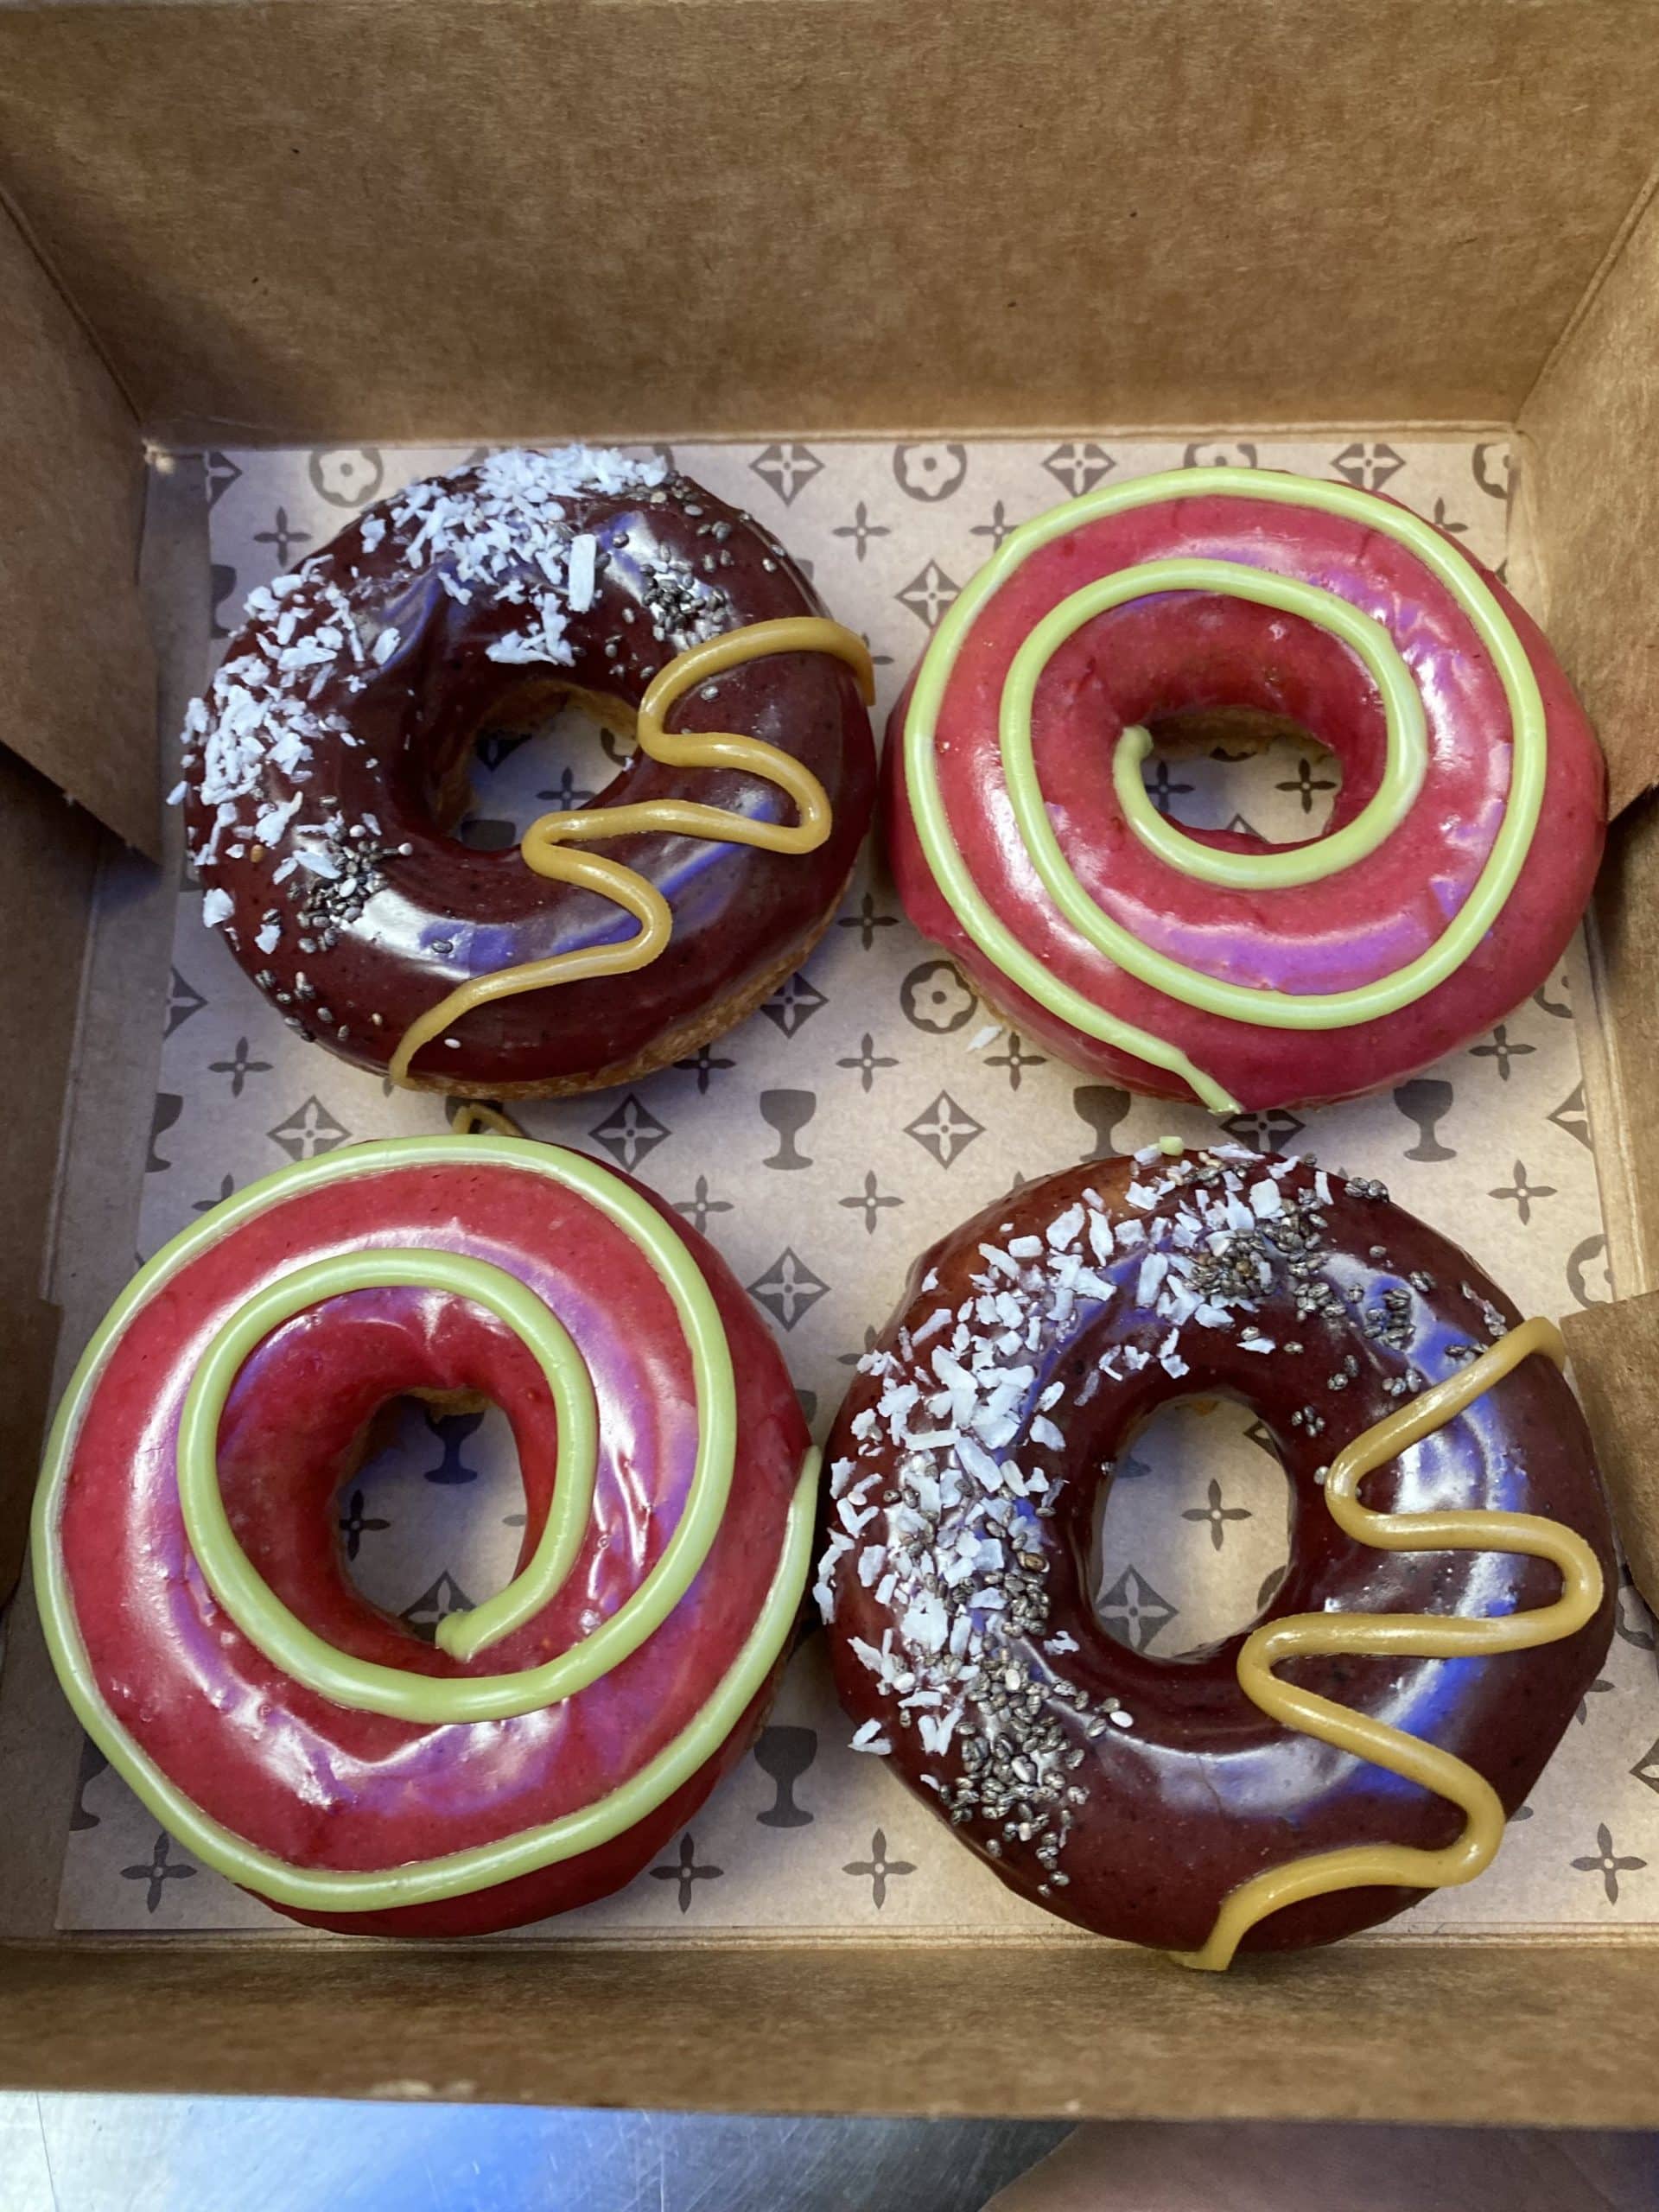 Box of four donuts with two different flavors including chocolate coconut and strawberry